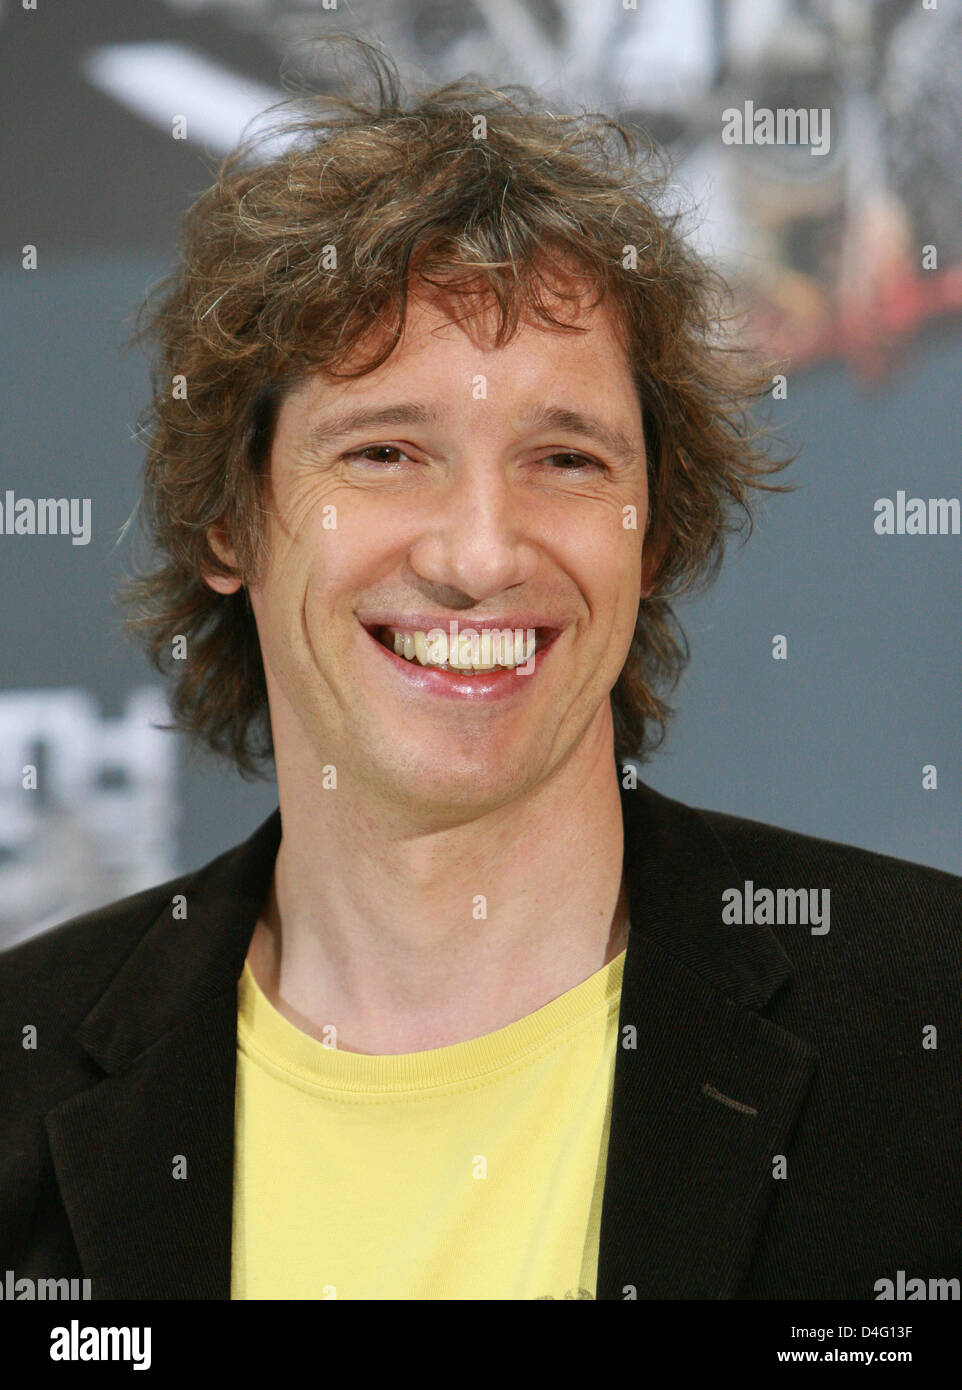 British actor Paul W.S. Anderson poses during the photocall for the movie 'Death Race' in Berlin, Germany, 11 September 2008. The remake of trash classic 'Death Race 2000', in which prisoners attend a jail-race, will premiere in German cinemas on 27 November 2008. Photo: JENS KALAENE Stock Photo